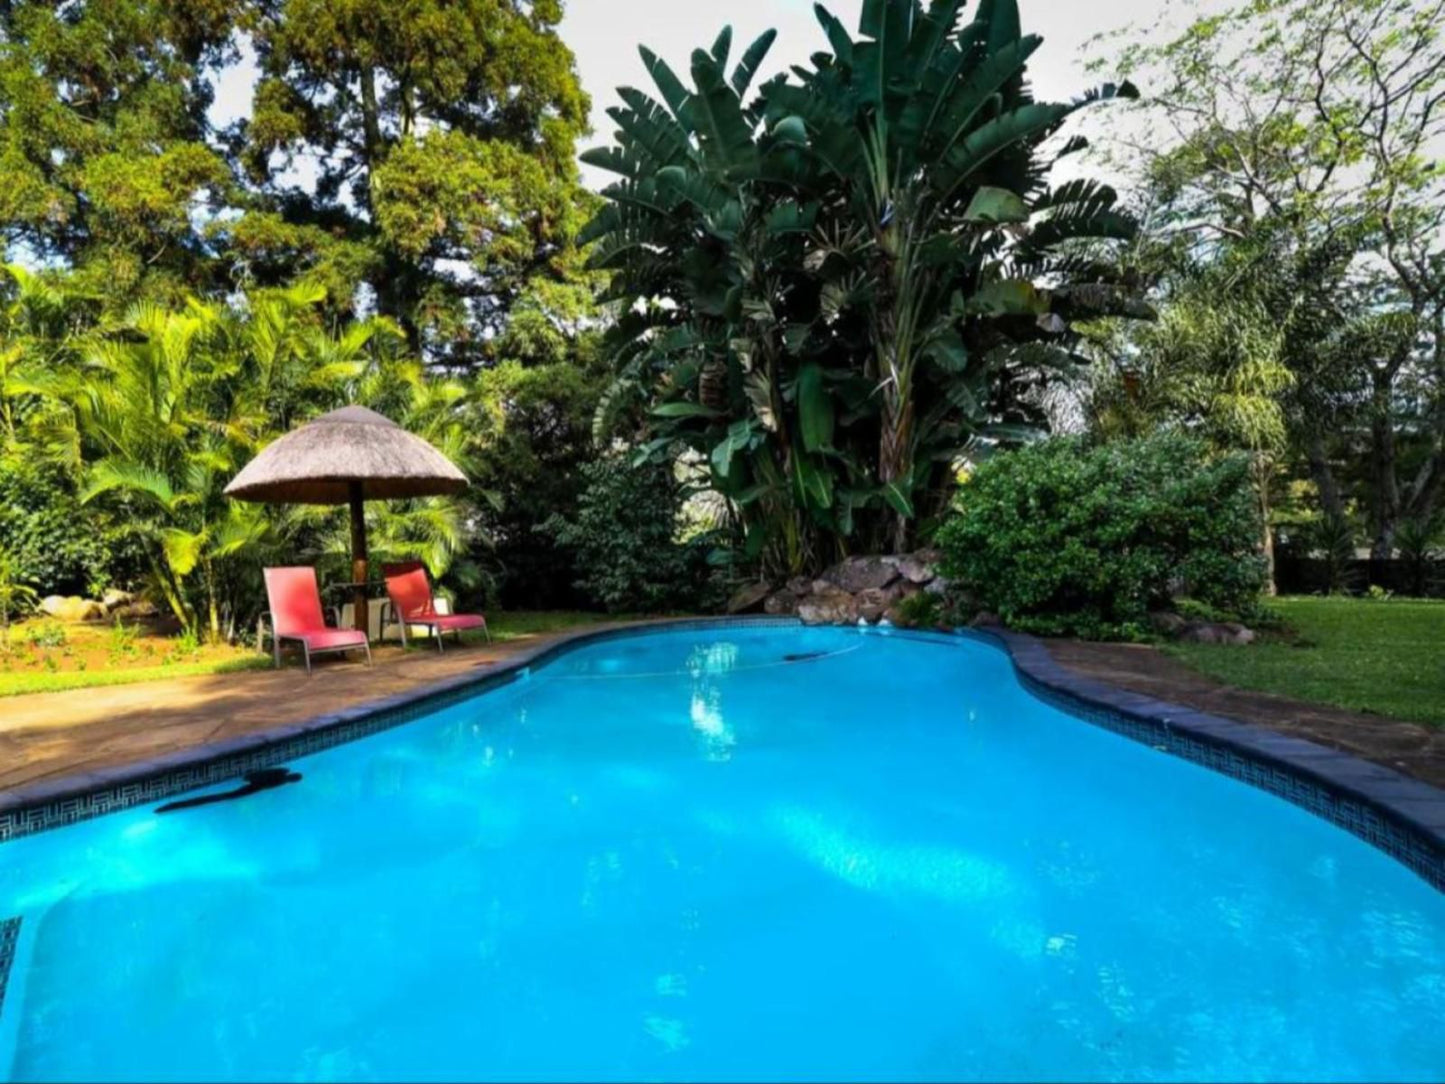 Sibsons House Hillcrest Durban Kwazulu Natal South Africa Complementary Colors, Palm Tree, Plant, Nature, Wood, Garden, Swimming Pool